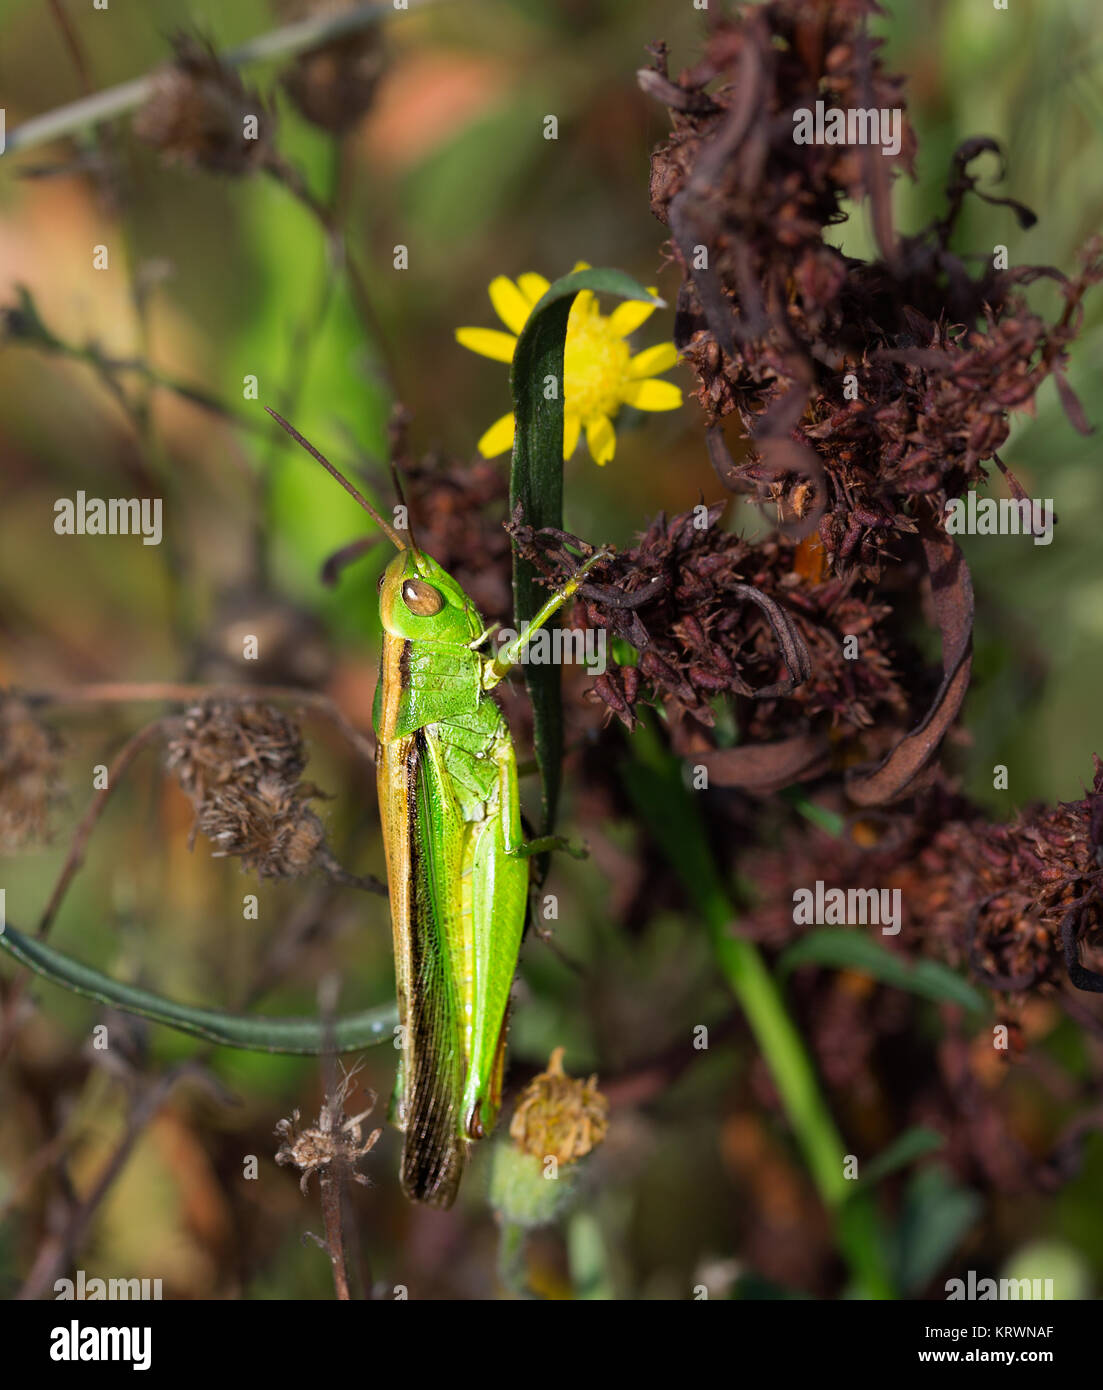 Green grasshopper photographed in their natural environment. Stock Photo